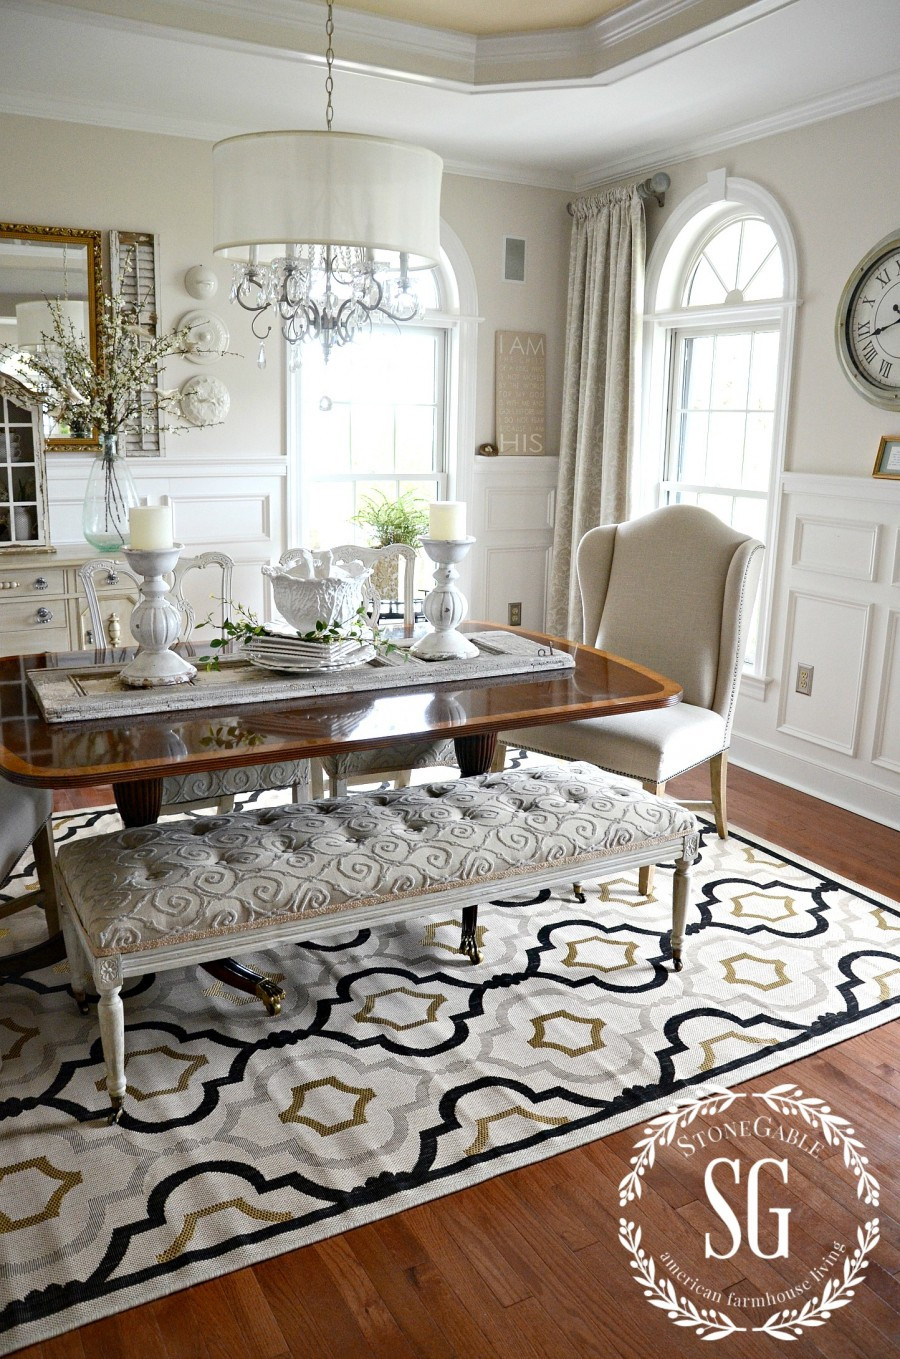 Dining Table In Living Room
 5 RULES FOR CHOOSING THE PERFECT DINING ROOM RUG StoneGable